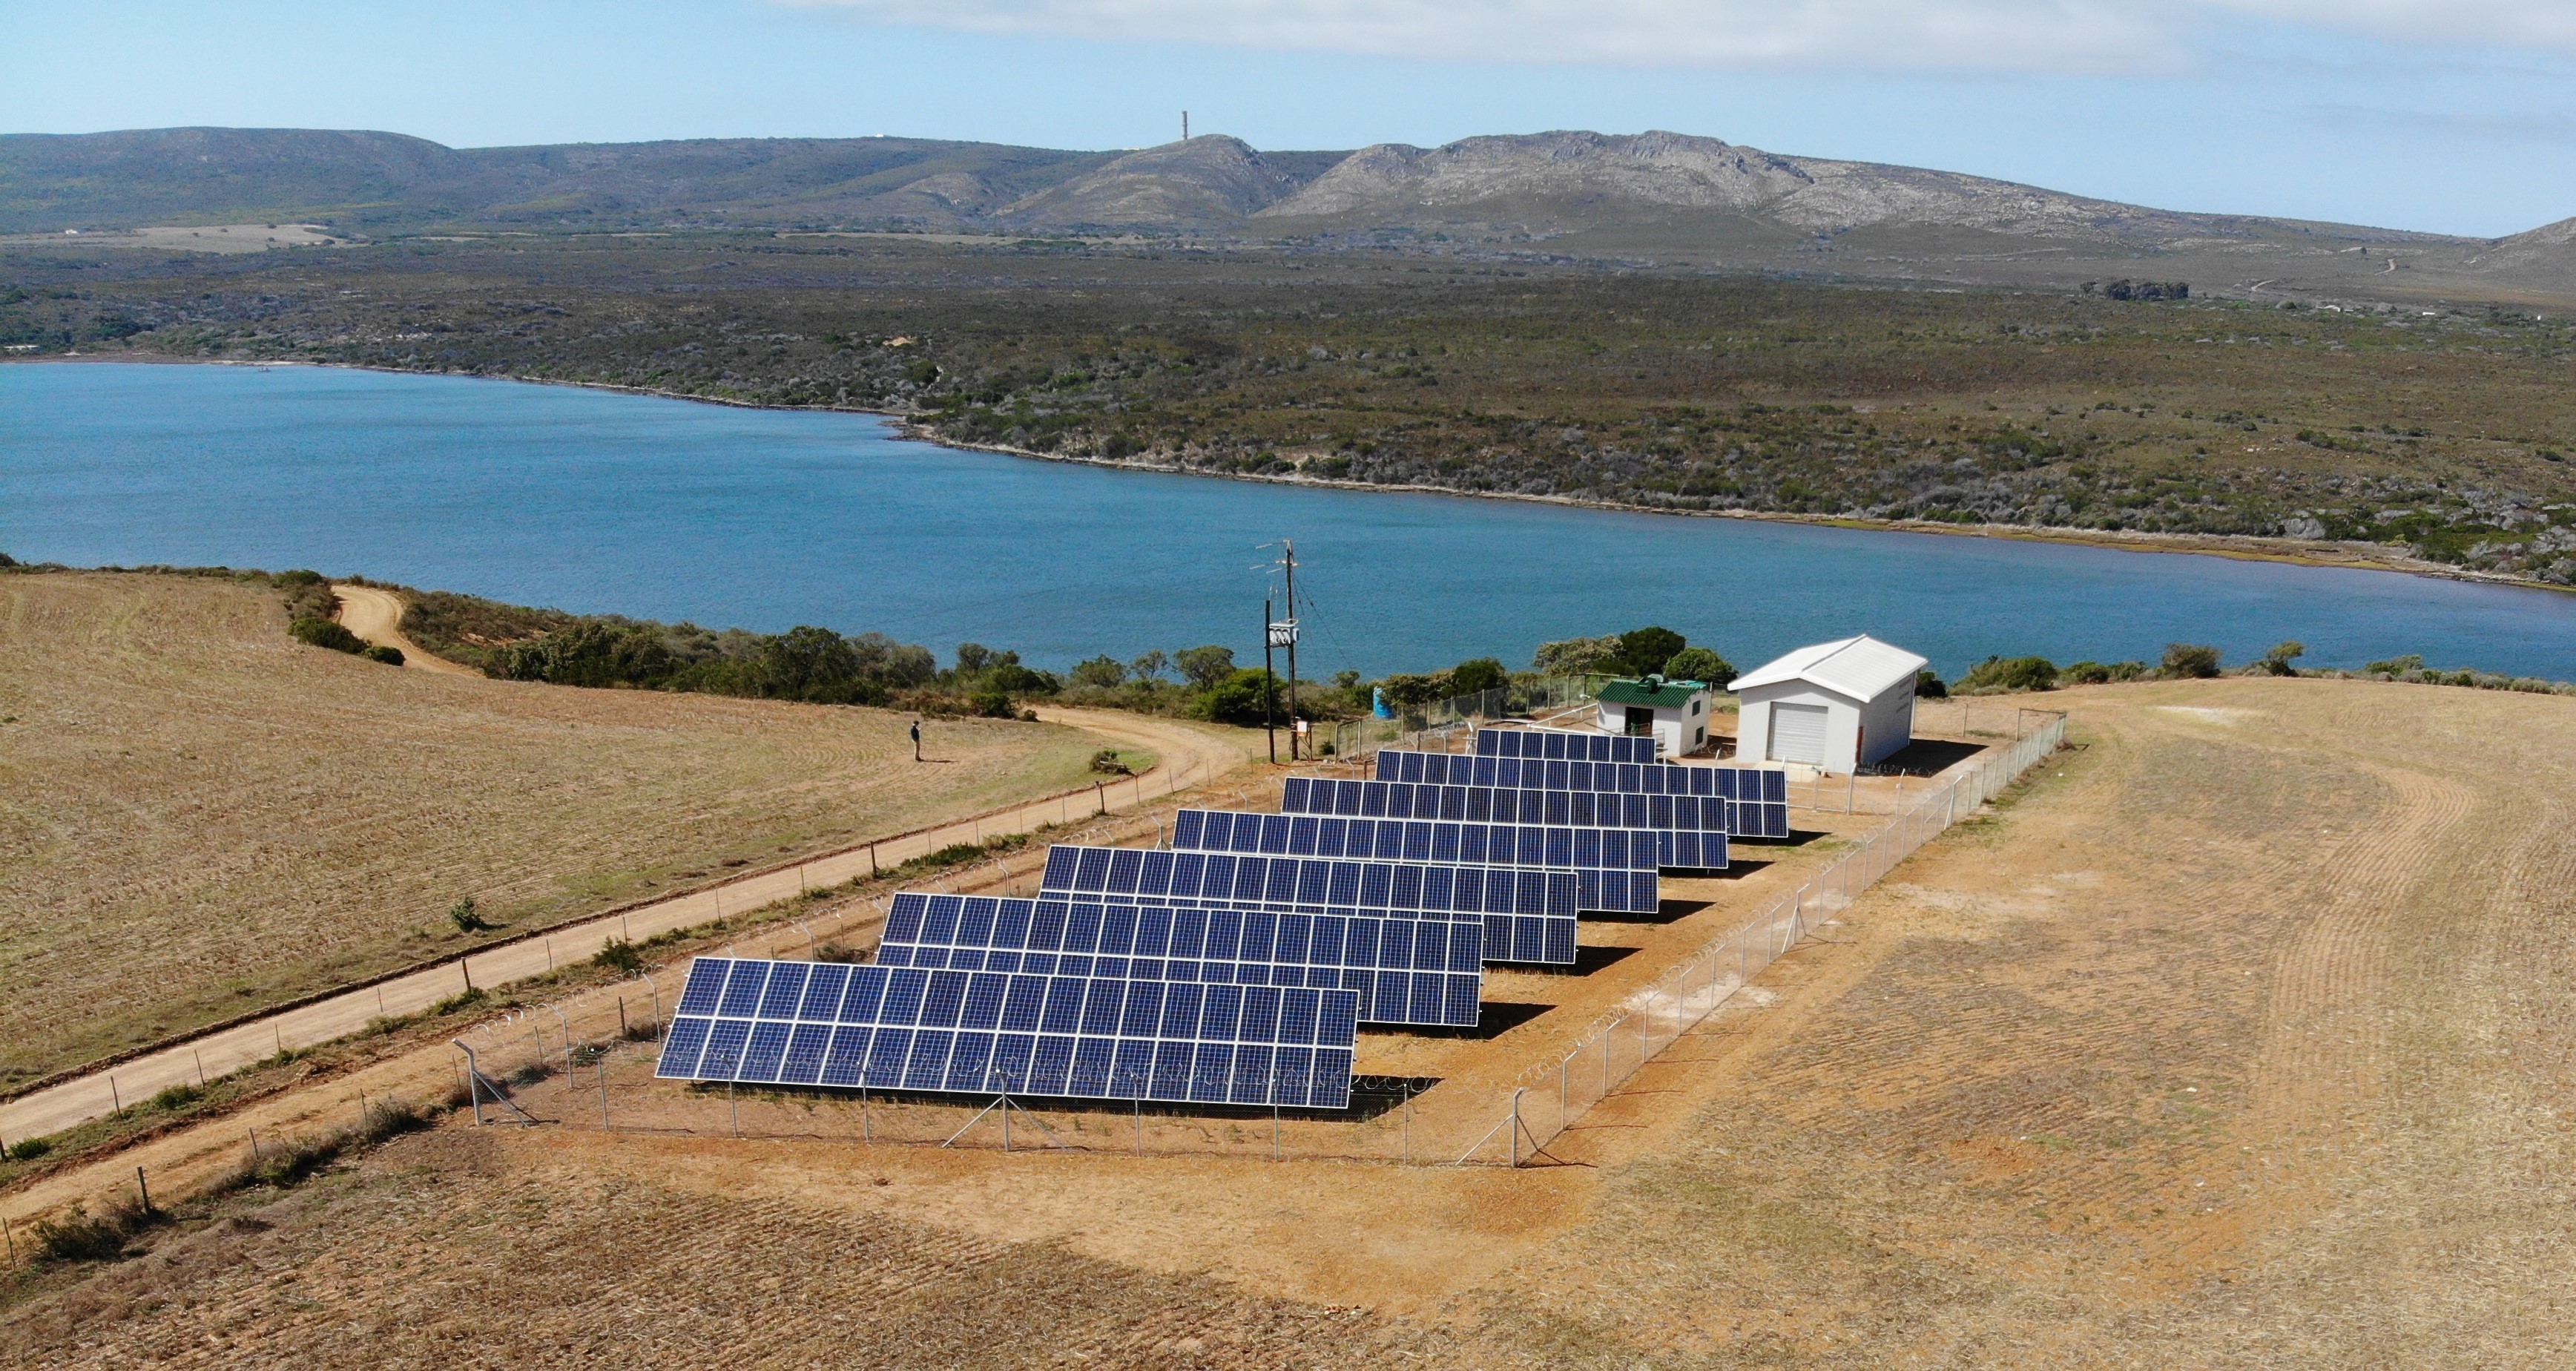 Africa’s first solar desalination plant at Witsand, Hessequa Municipality, South Africa.